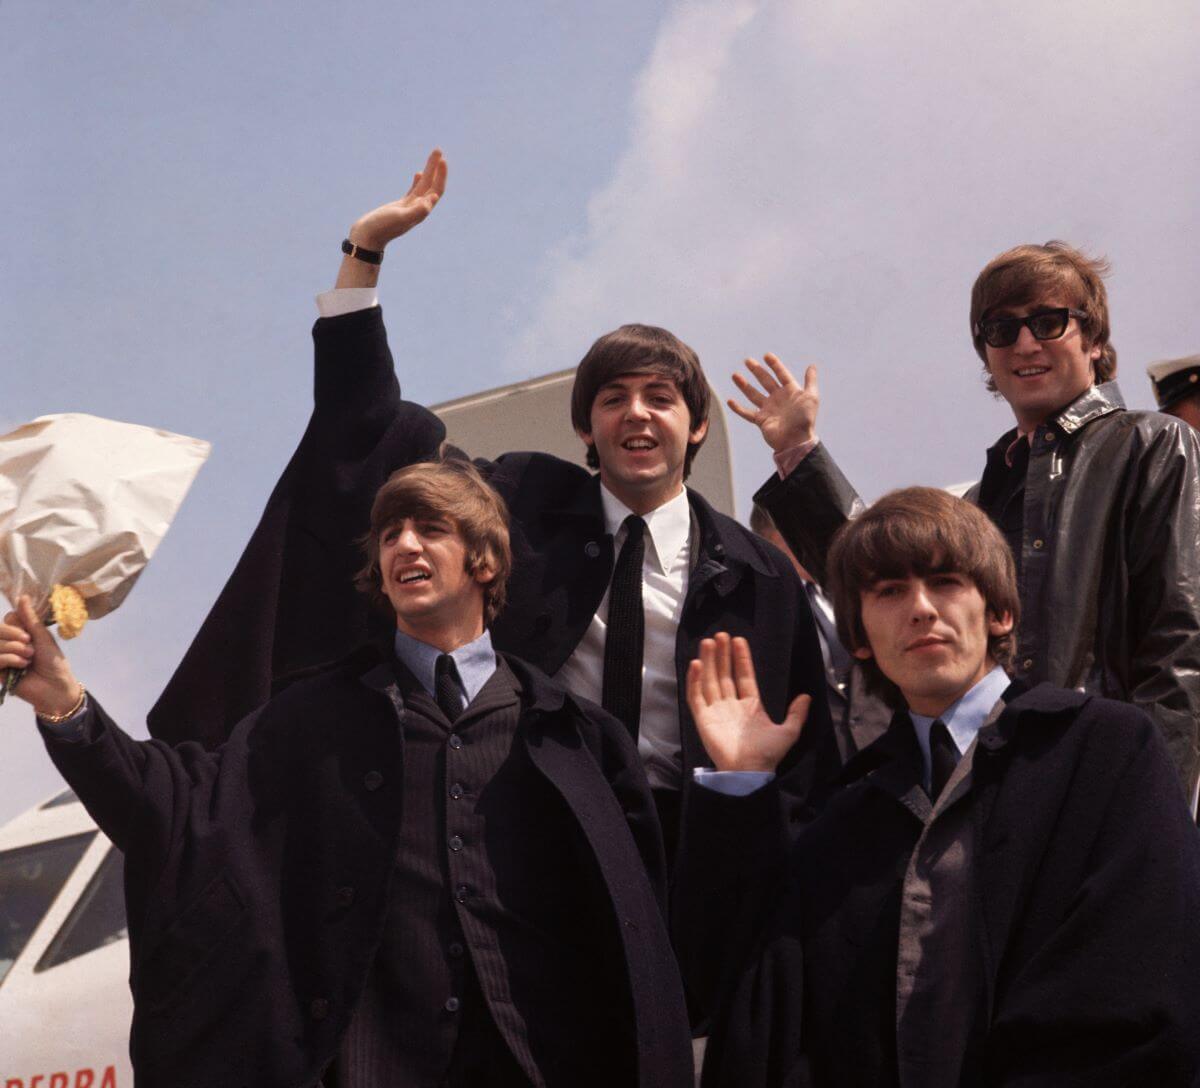 Ringo Starr, Paul McCartney, George Harrison, and John Lennon of The Beatles wave from the opening of an airplane.